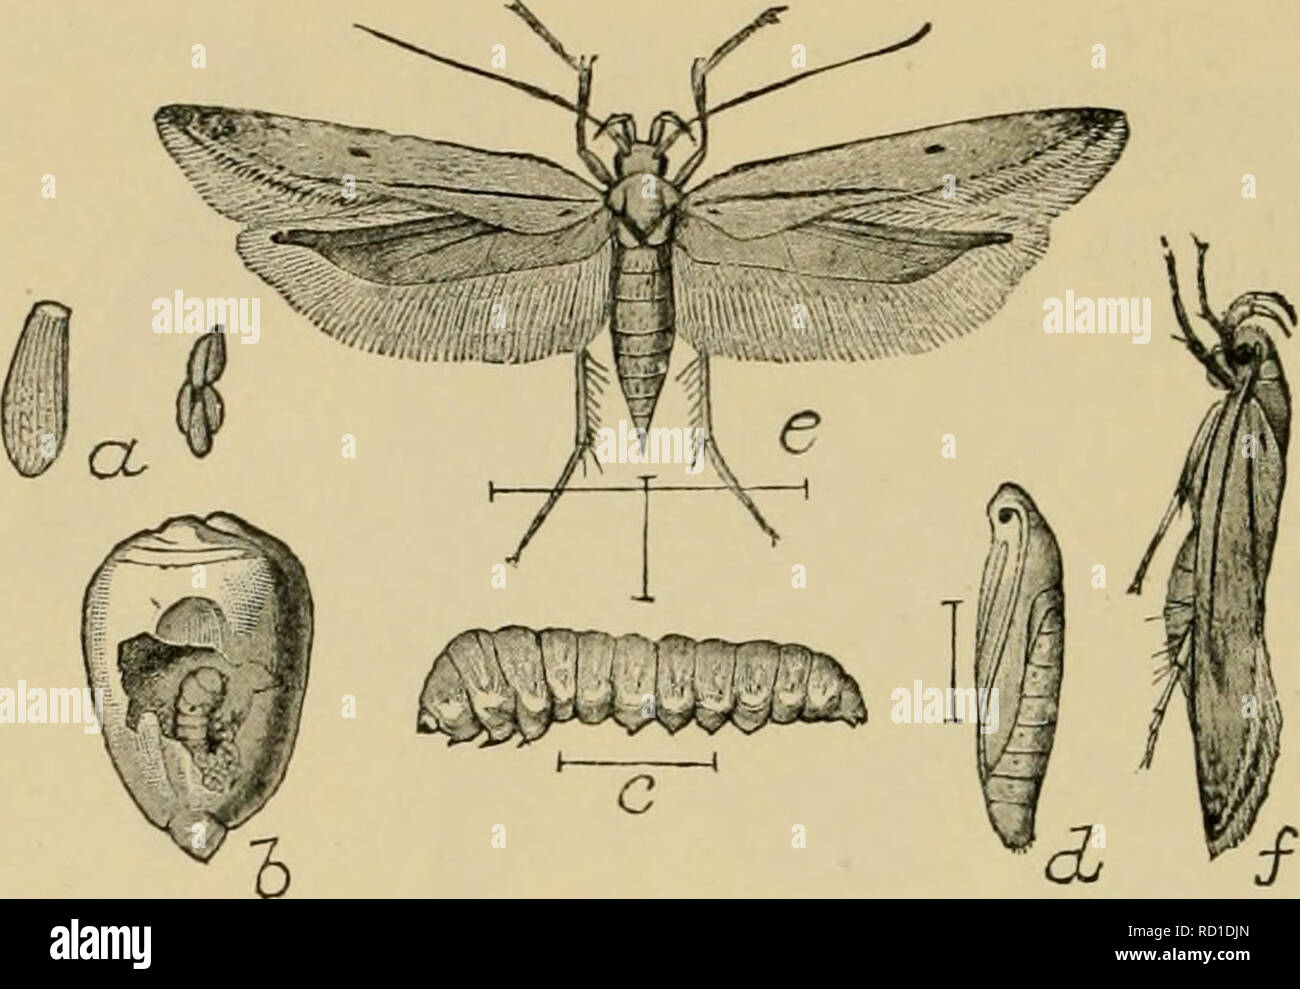 . Elementary entomology. Entomology. 186 ELEMENTARY ENTOMOLOGY. Fig. 288. The angumois grain-moth [Sitotroga cerealella 01.). (Enlarged) rt, eggs ; b, larva at work ; f, larva ; d, pupa ; ^, /&quot;, moth. (After Chittenden, United States Department of Agriculture) from the shapes of the cases. Nearly related to them are the little clothes moths, the plague of every housekeeper, which feed on woolens, furs, etc. There are several species: one makes a case of bits of food fastened to- gether with silk, another builds a tube, and a third feeds unprotected. The more common forms are of a brown co Stock Photo